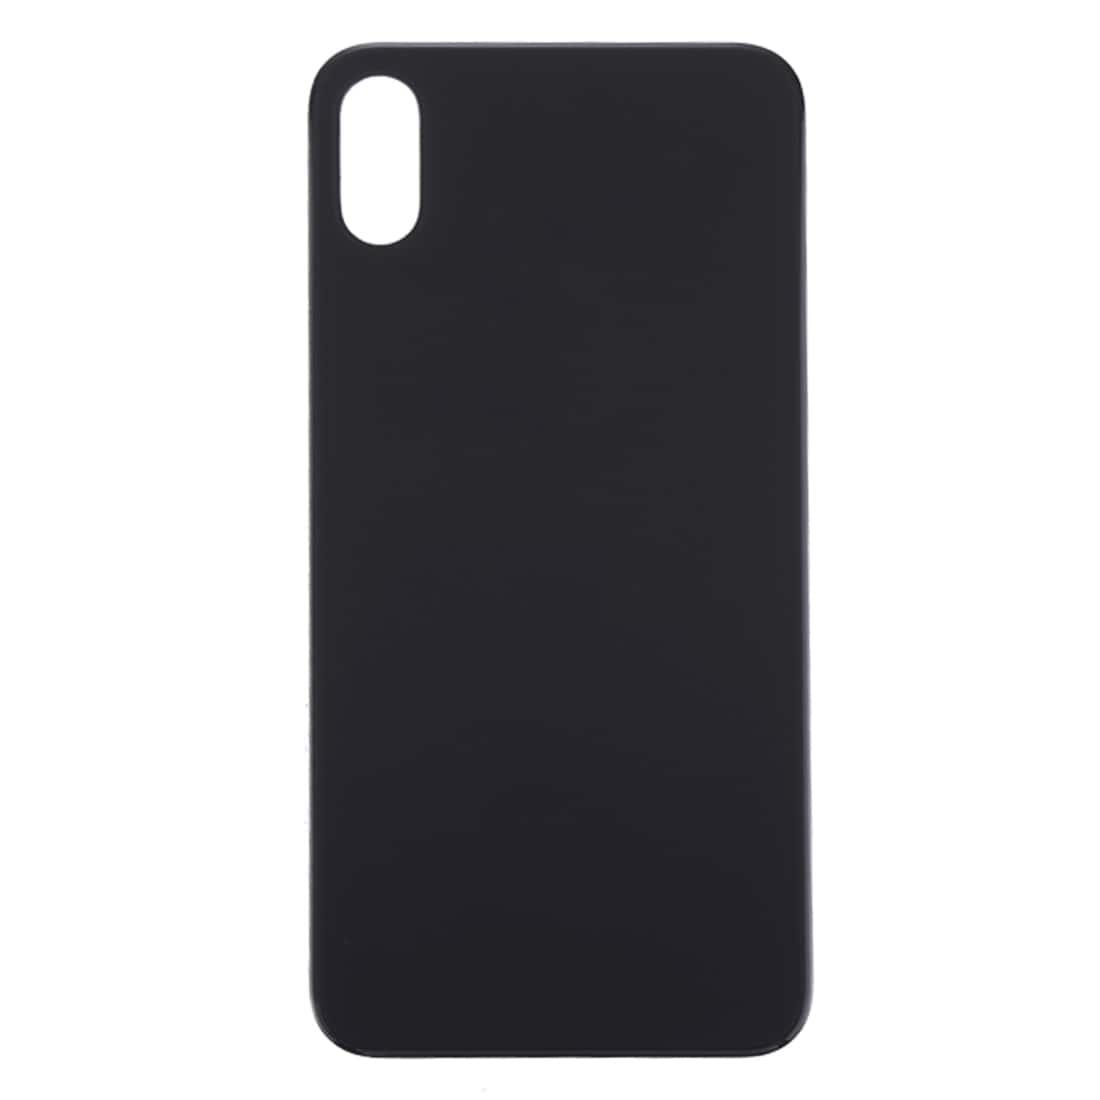 Back Glass Panel for  iPhone XS Black